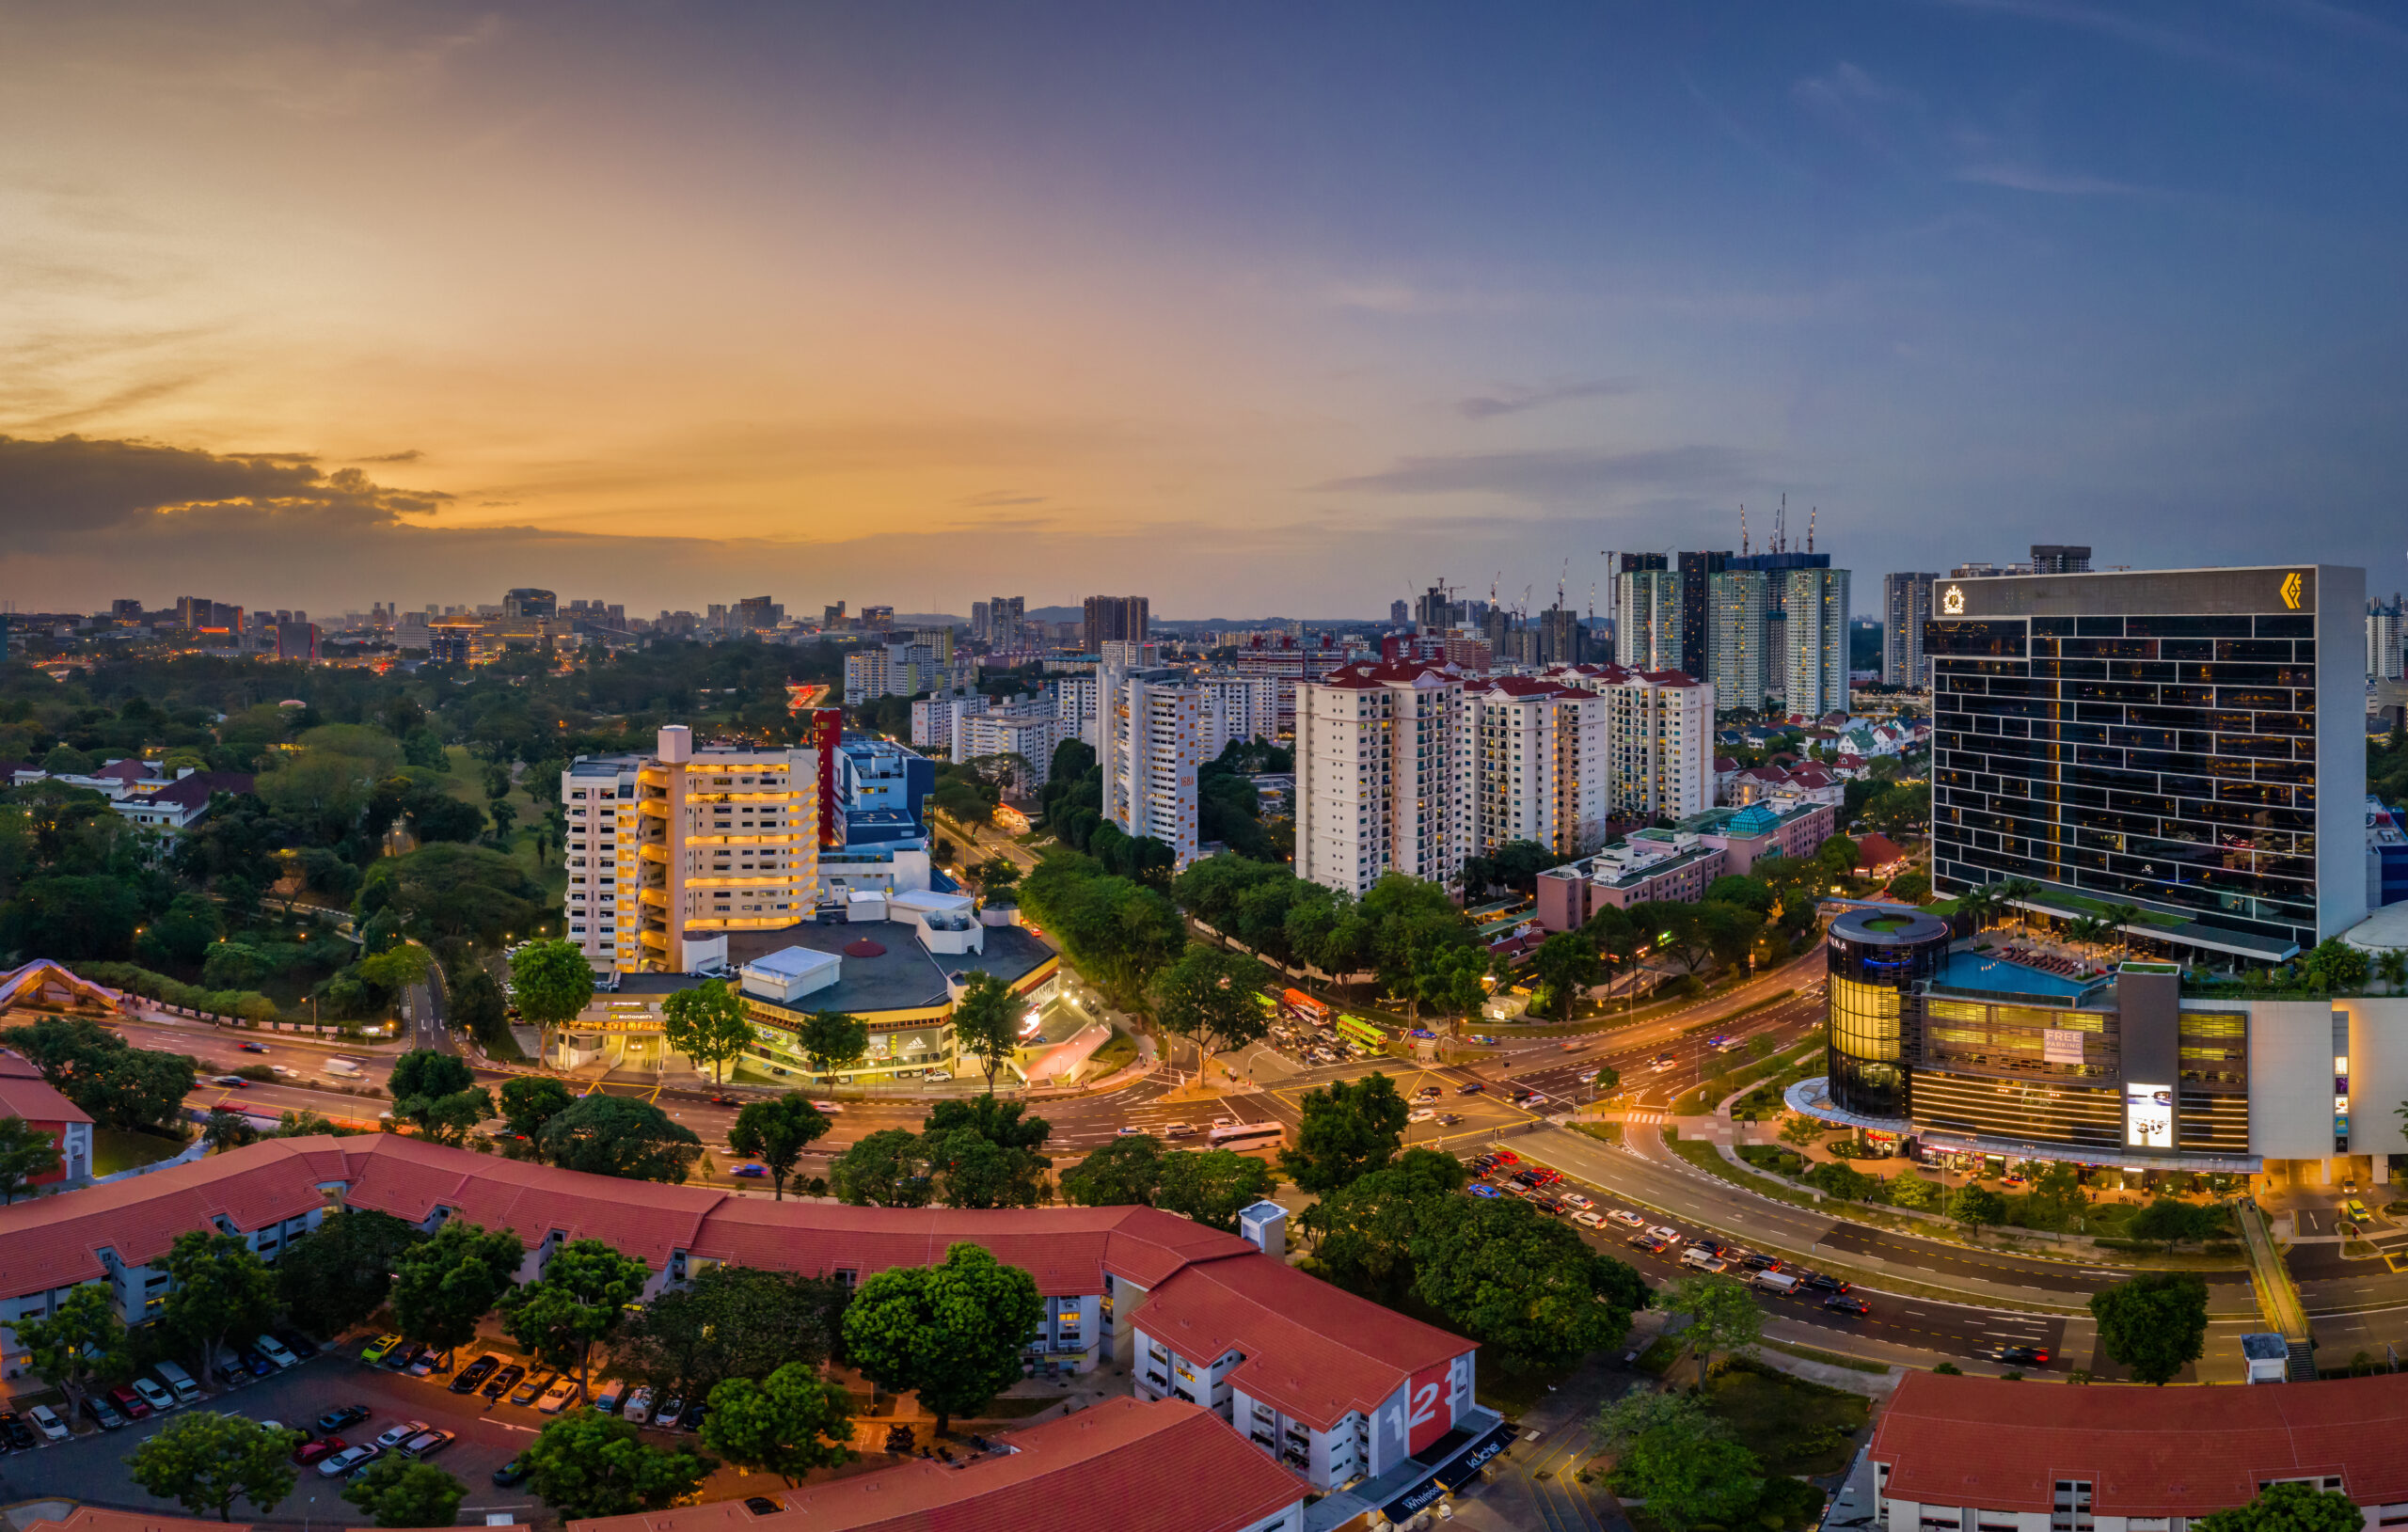 A wide shot of the lively Bukit Merah precinct in the evening